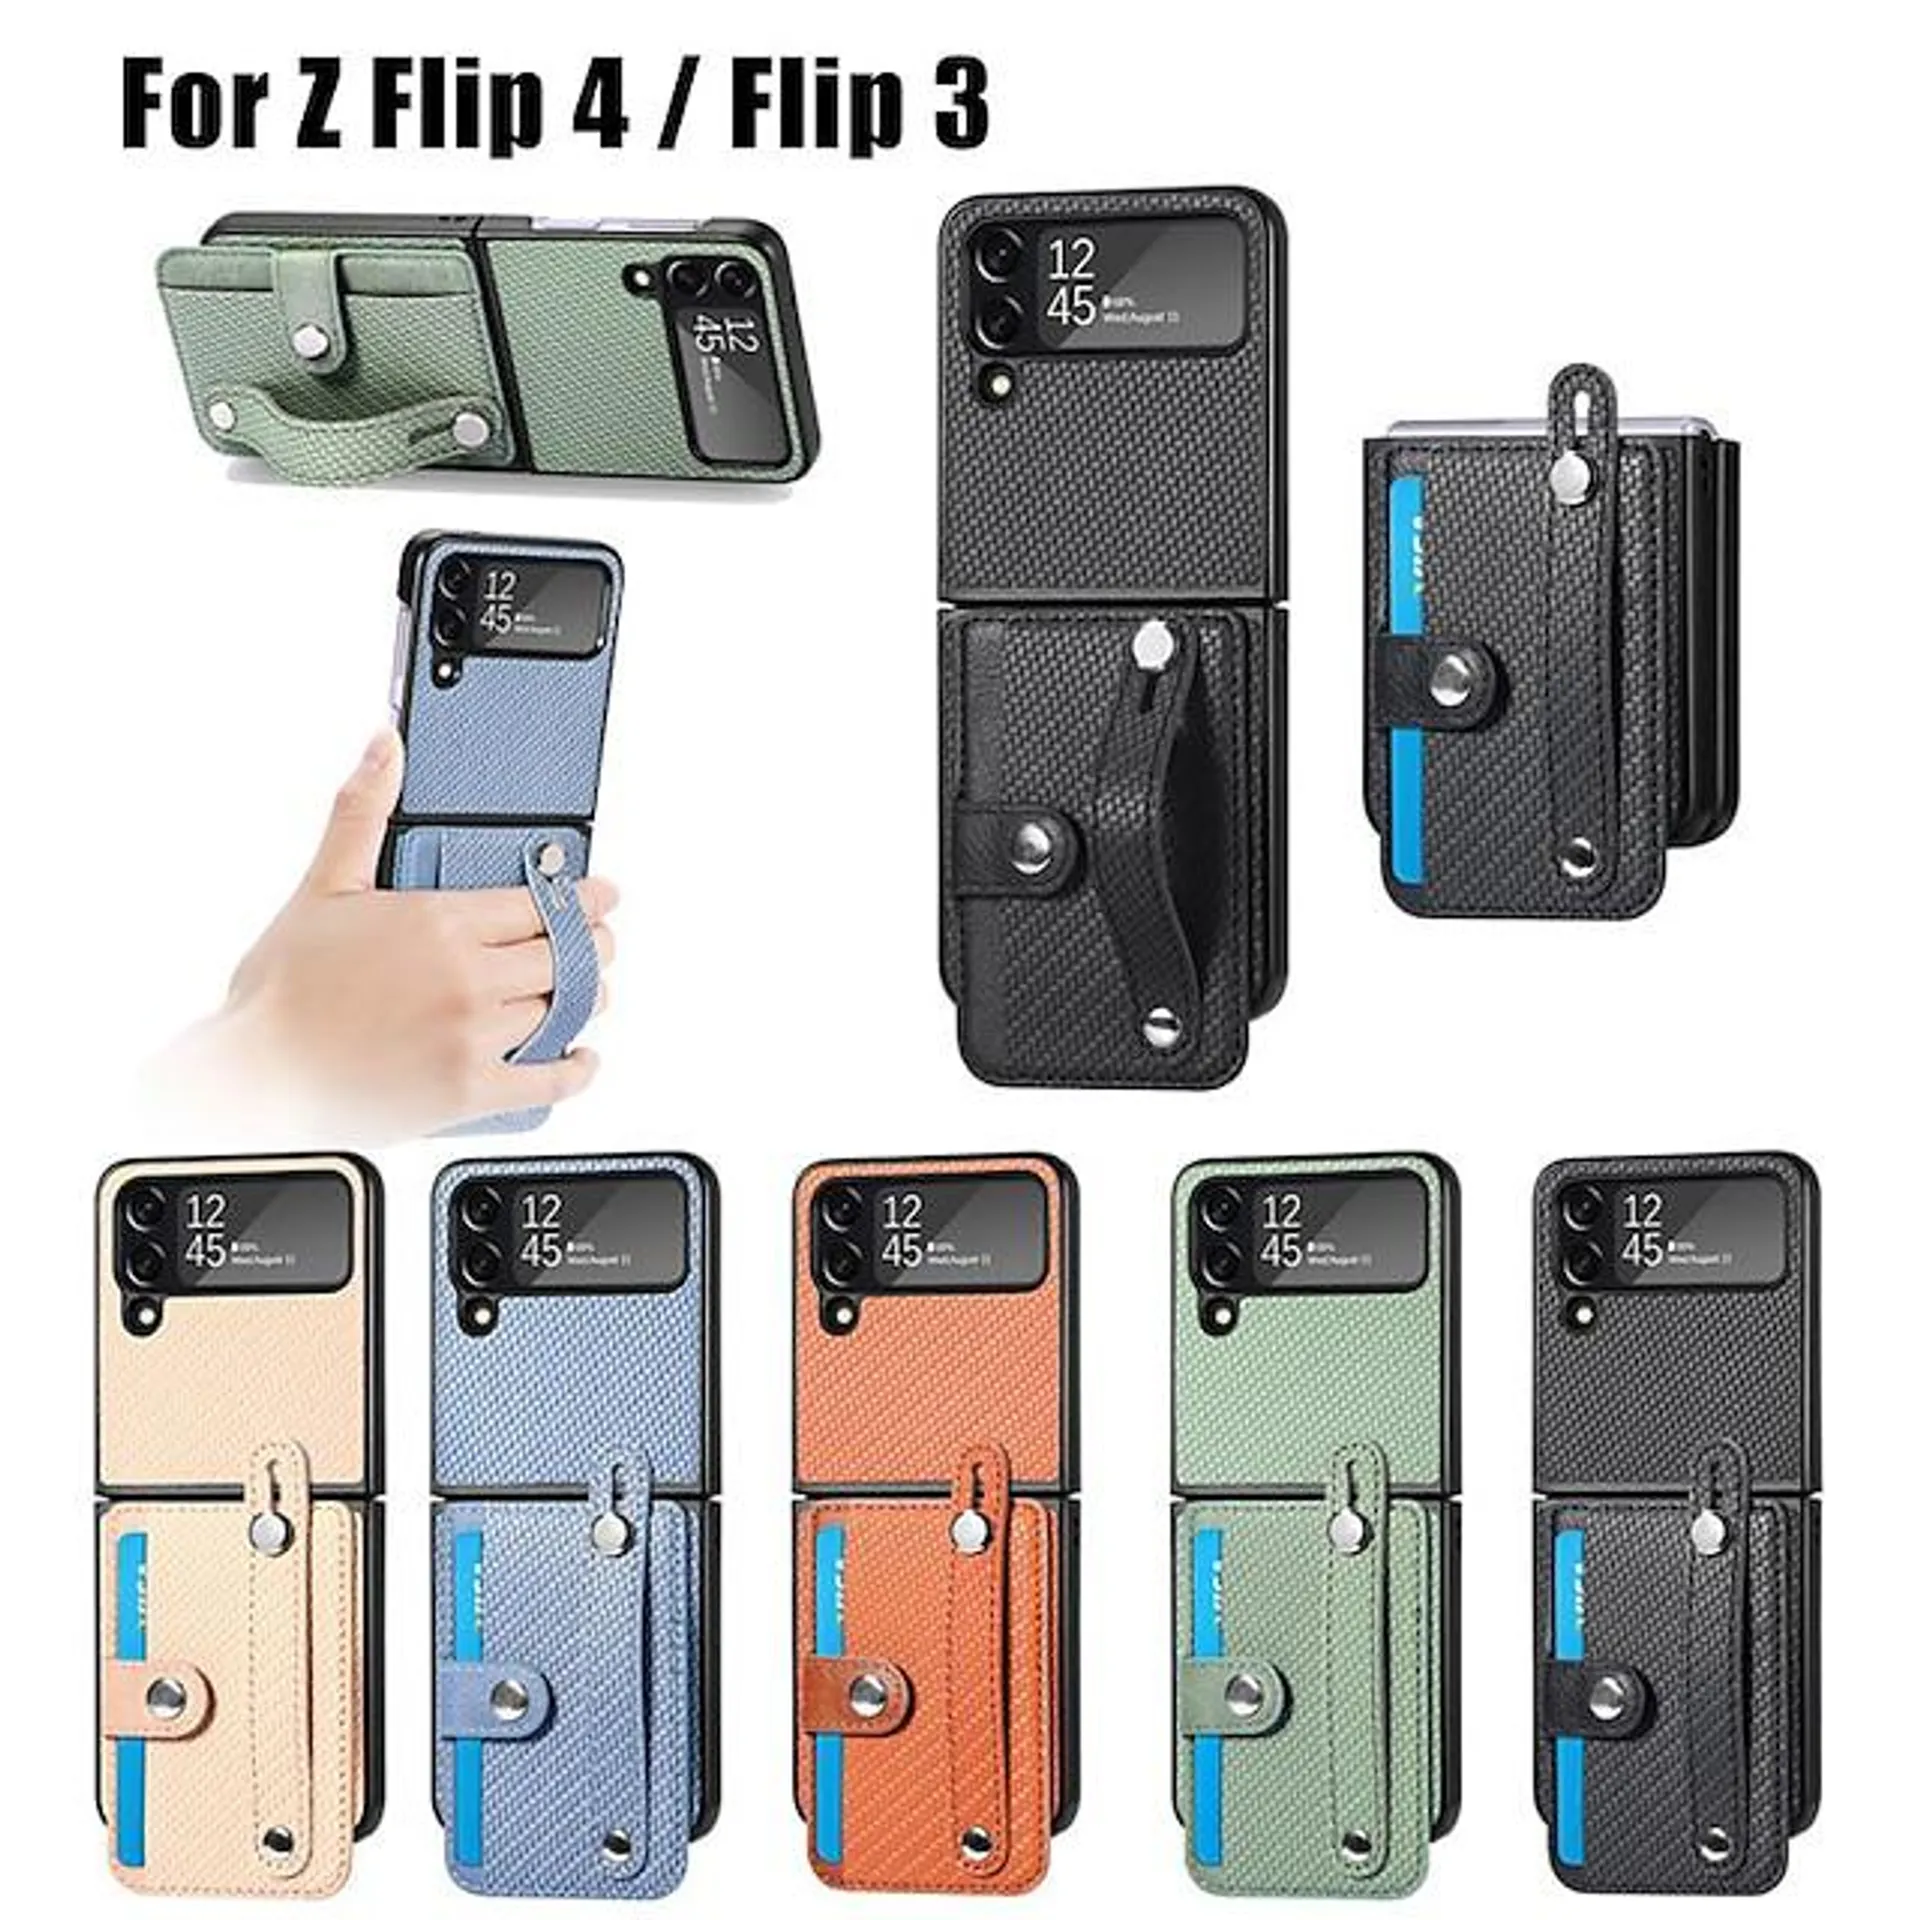 Phone Case For Samsung Galaxy Back Cover Z Flip 4 Z Flip 3 with Wrist Strap With Card Holder Kickstand Solid Colored PU Leather